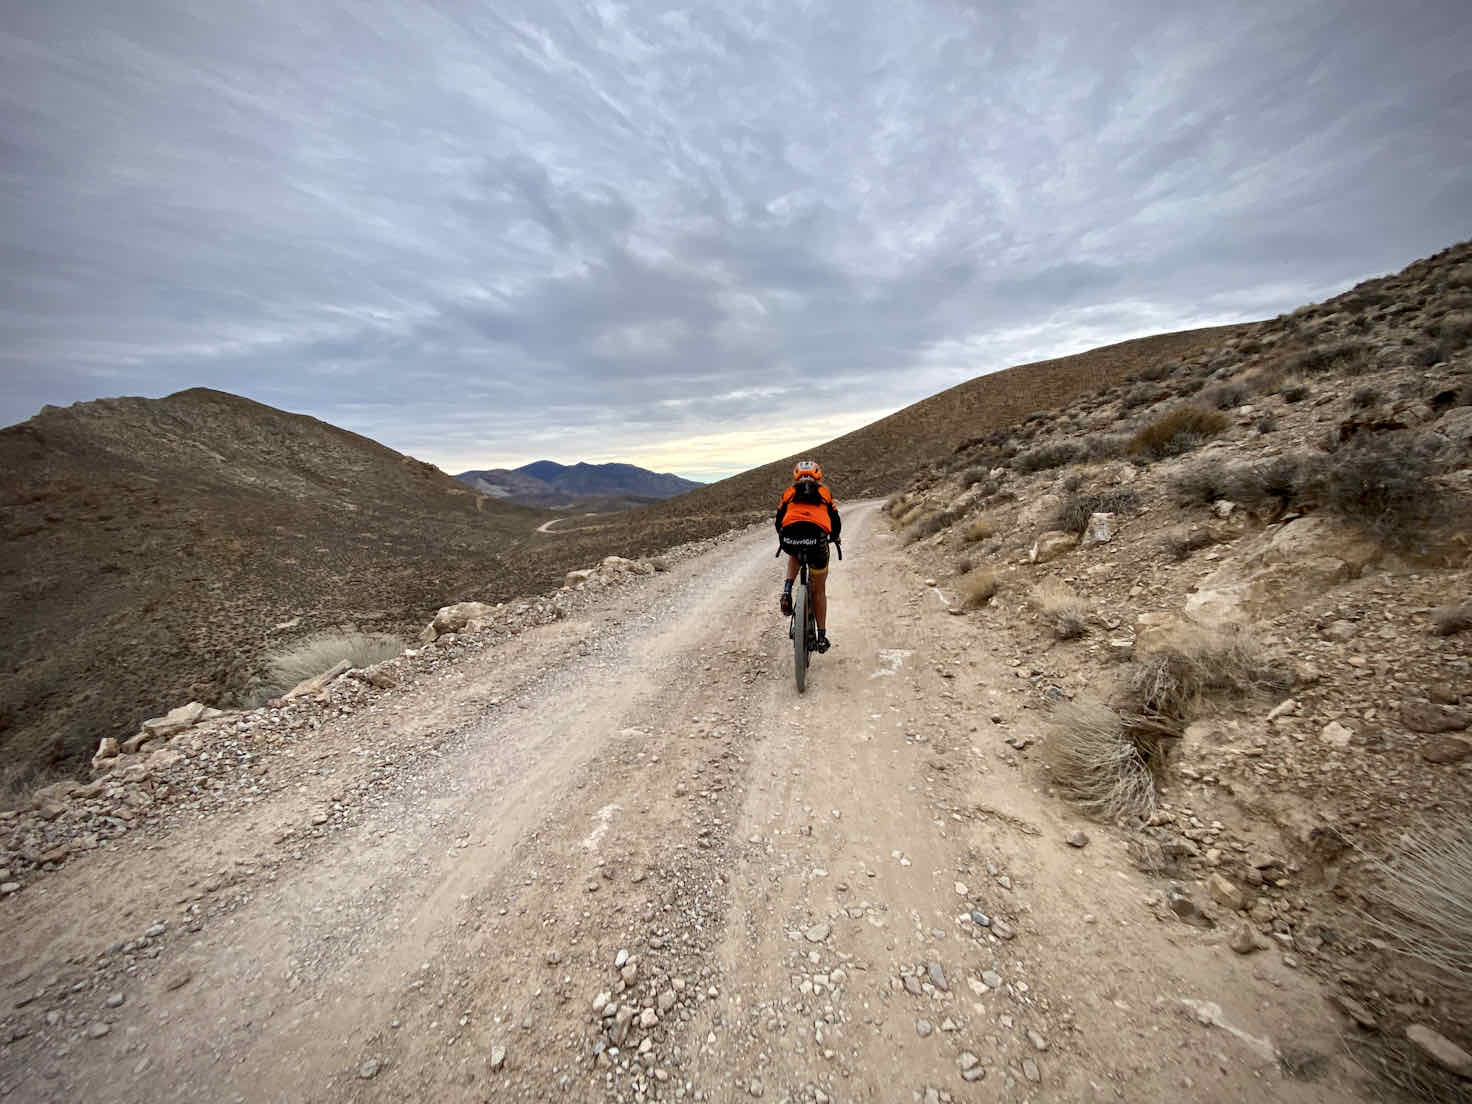 Cyclist negotiating the bumpy terrain along dirt road in Death Valley.